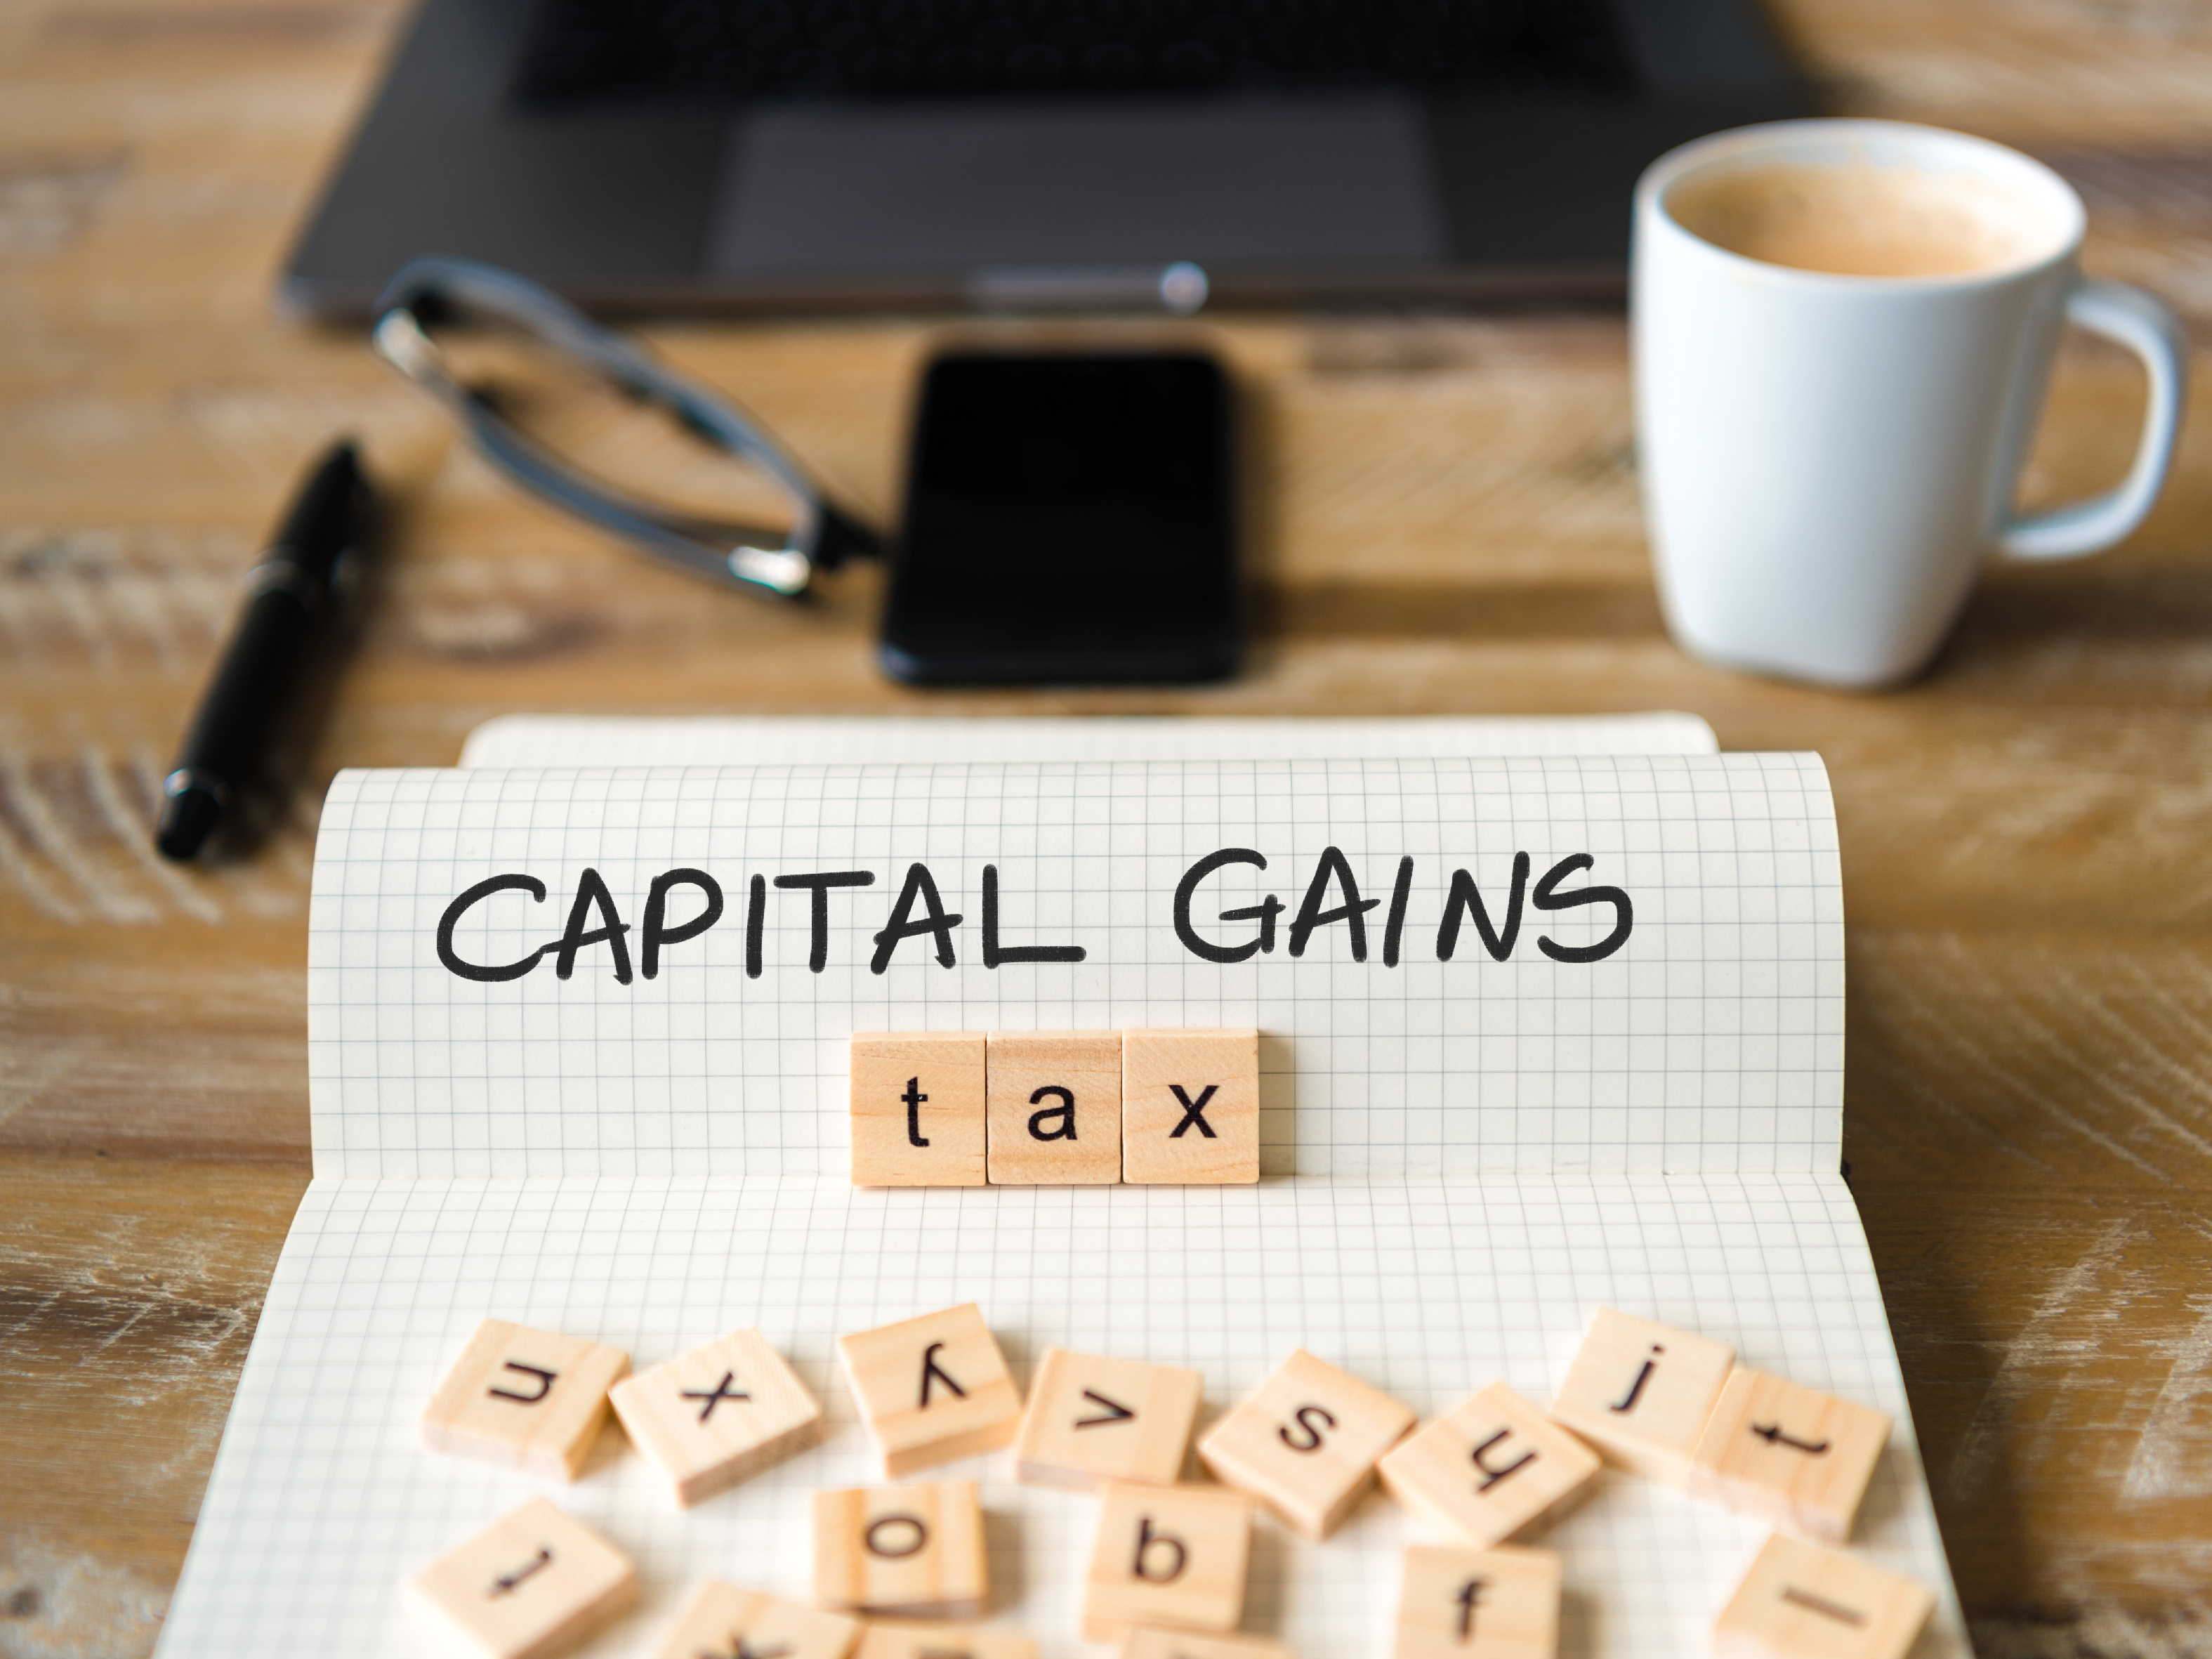 Everything you need to know about capital gains tax